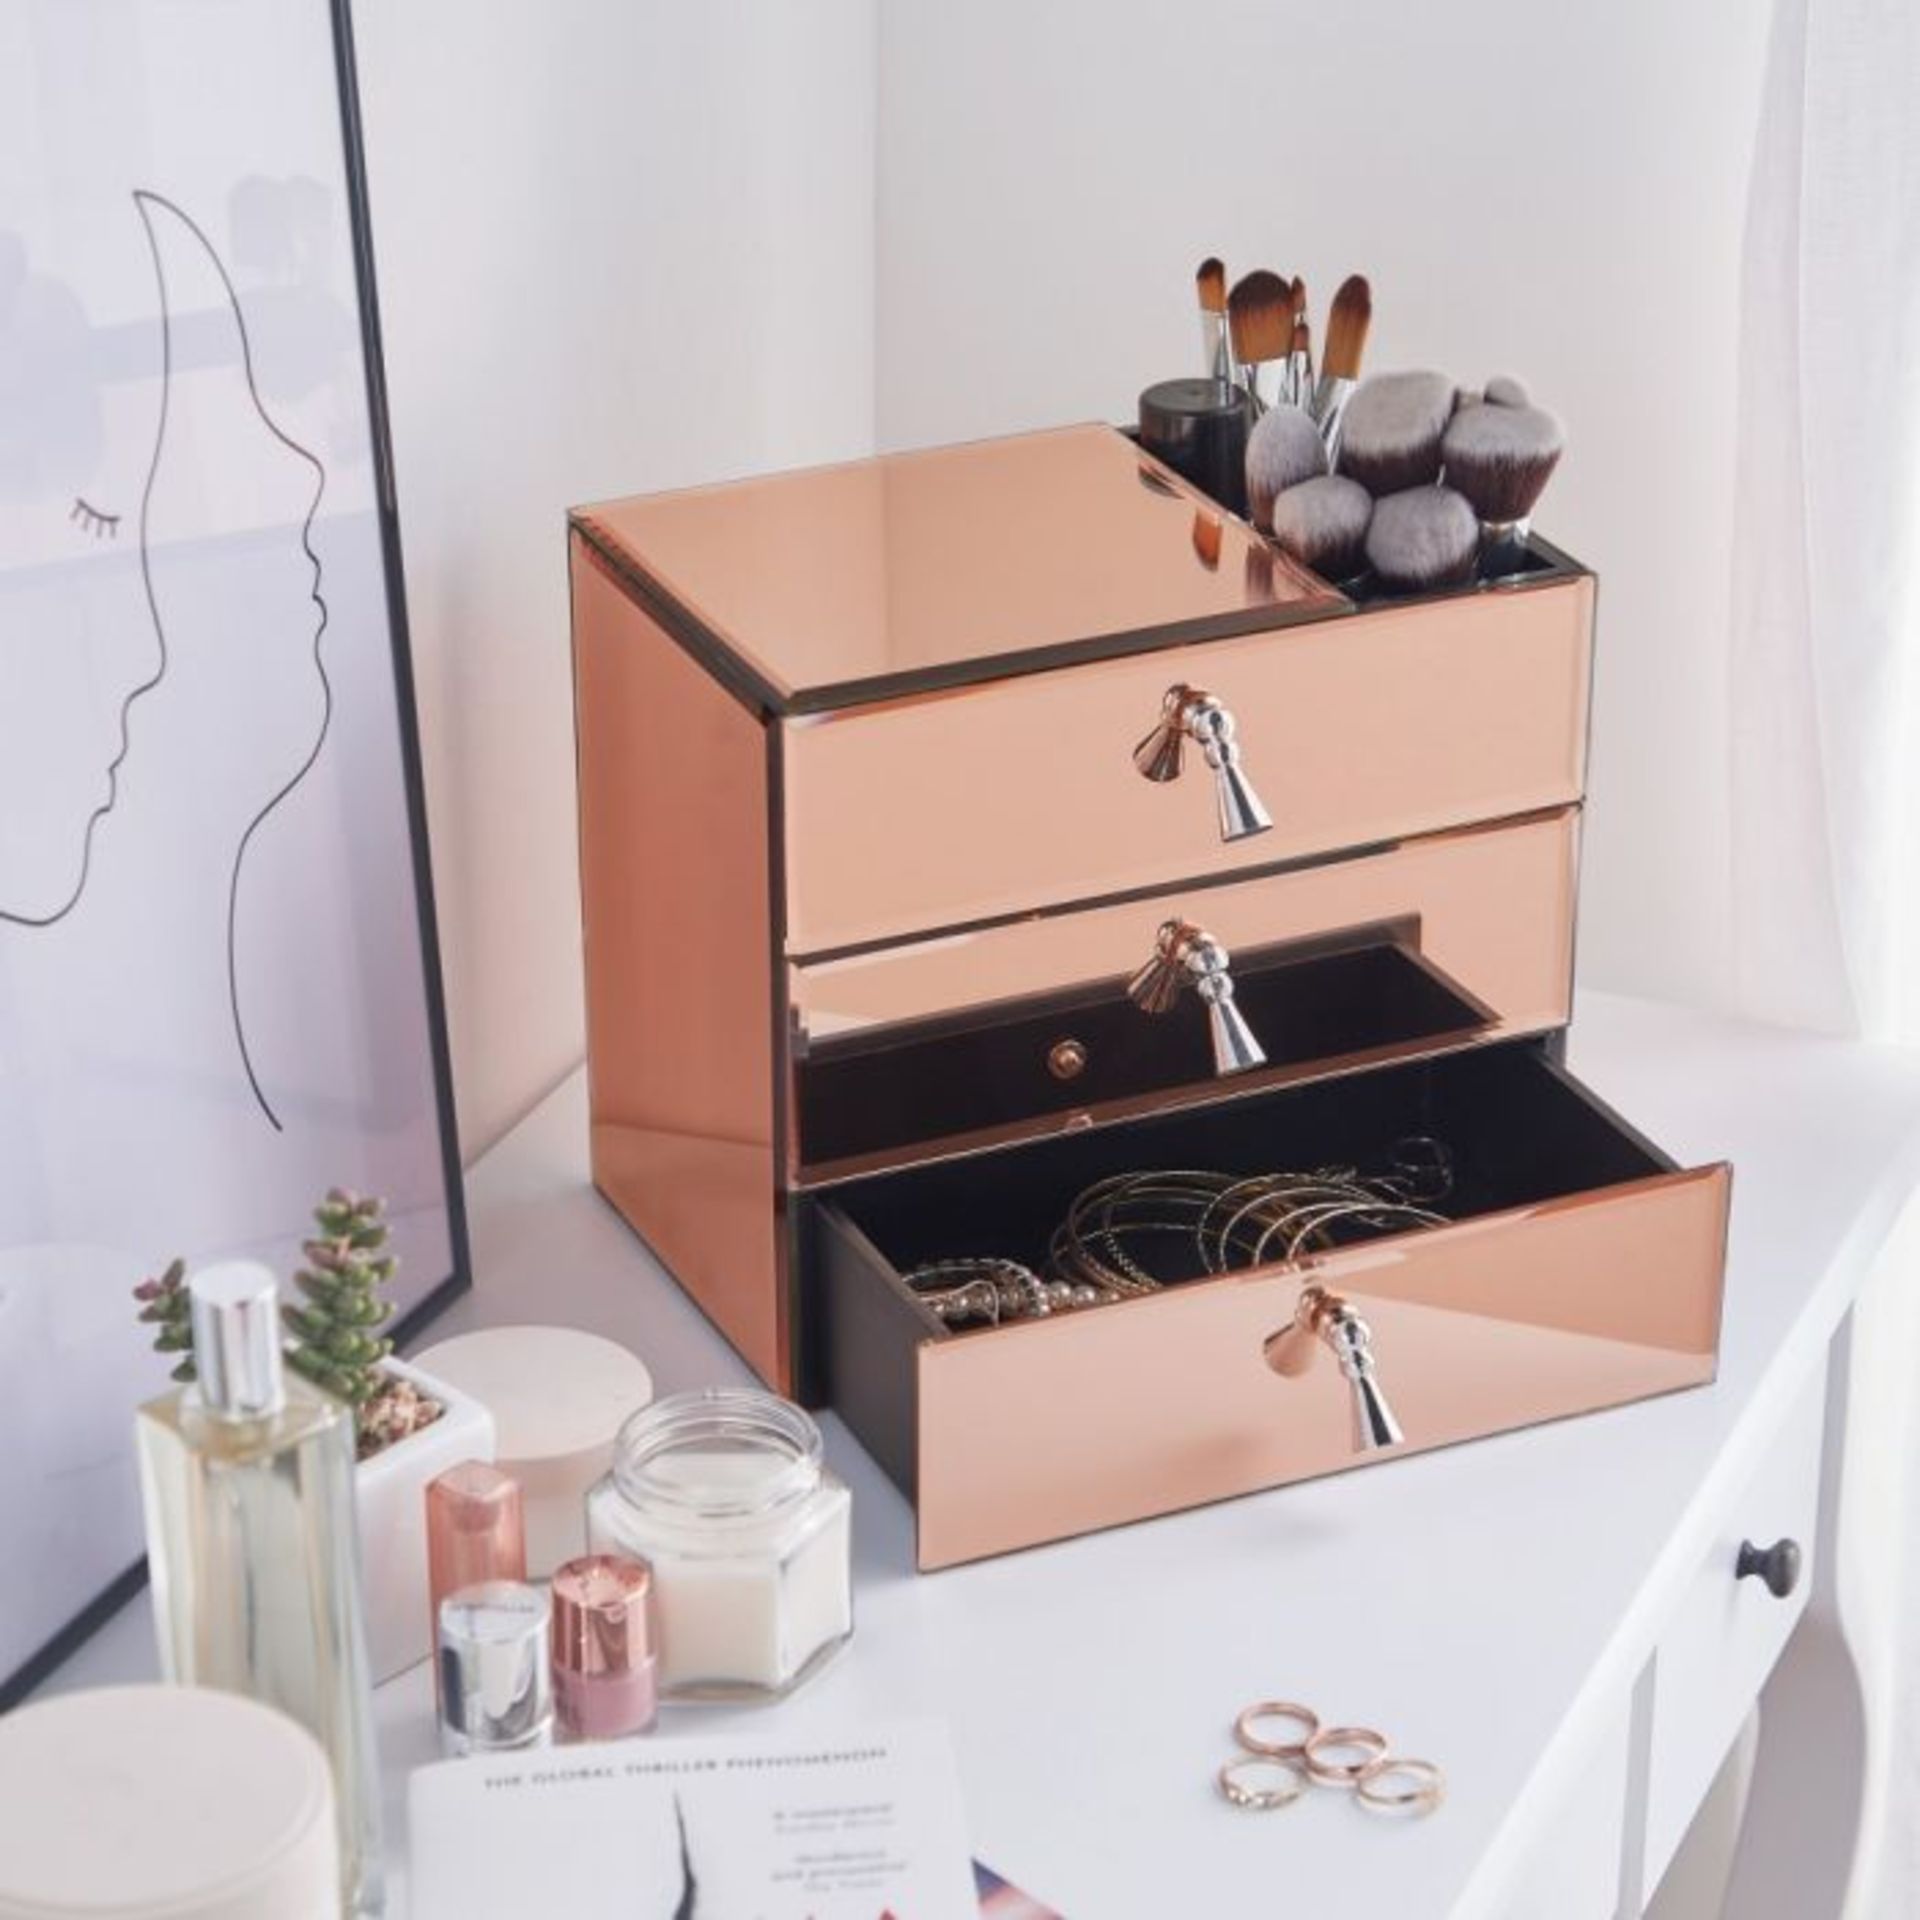 (S341) Rose Gold 3 Drawer Mirrored Jewellery Organiser The perfect place to hide away clutter ... - Image 3 of 3